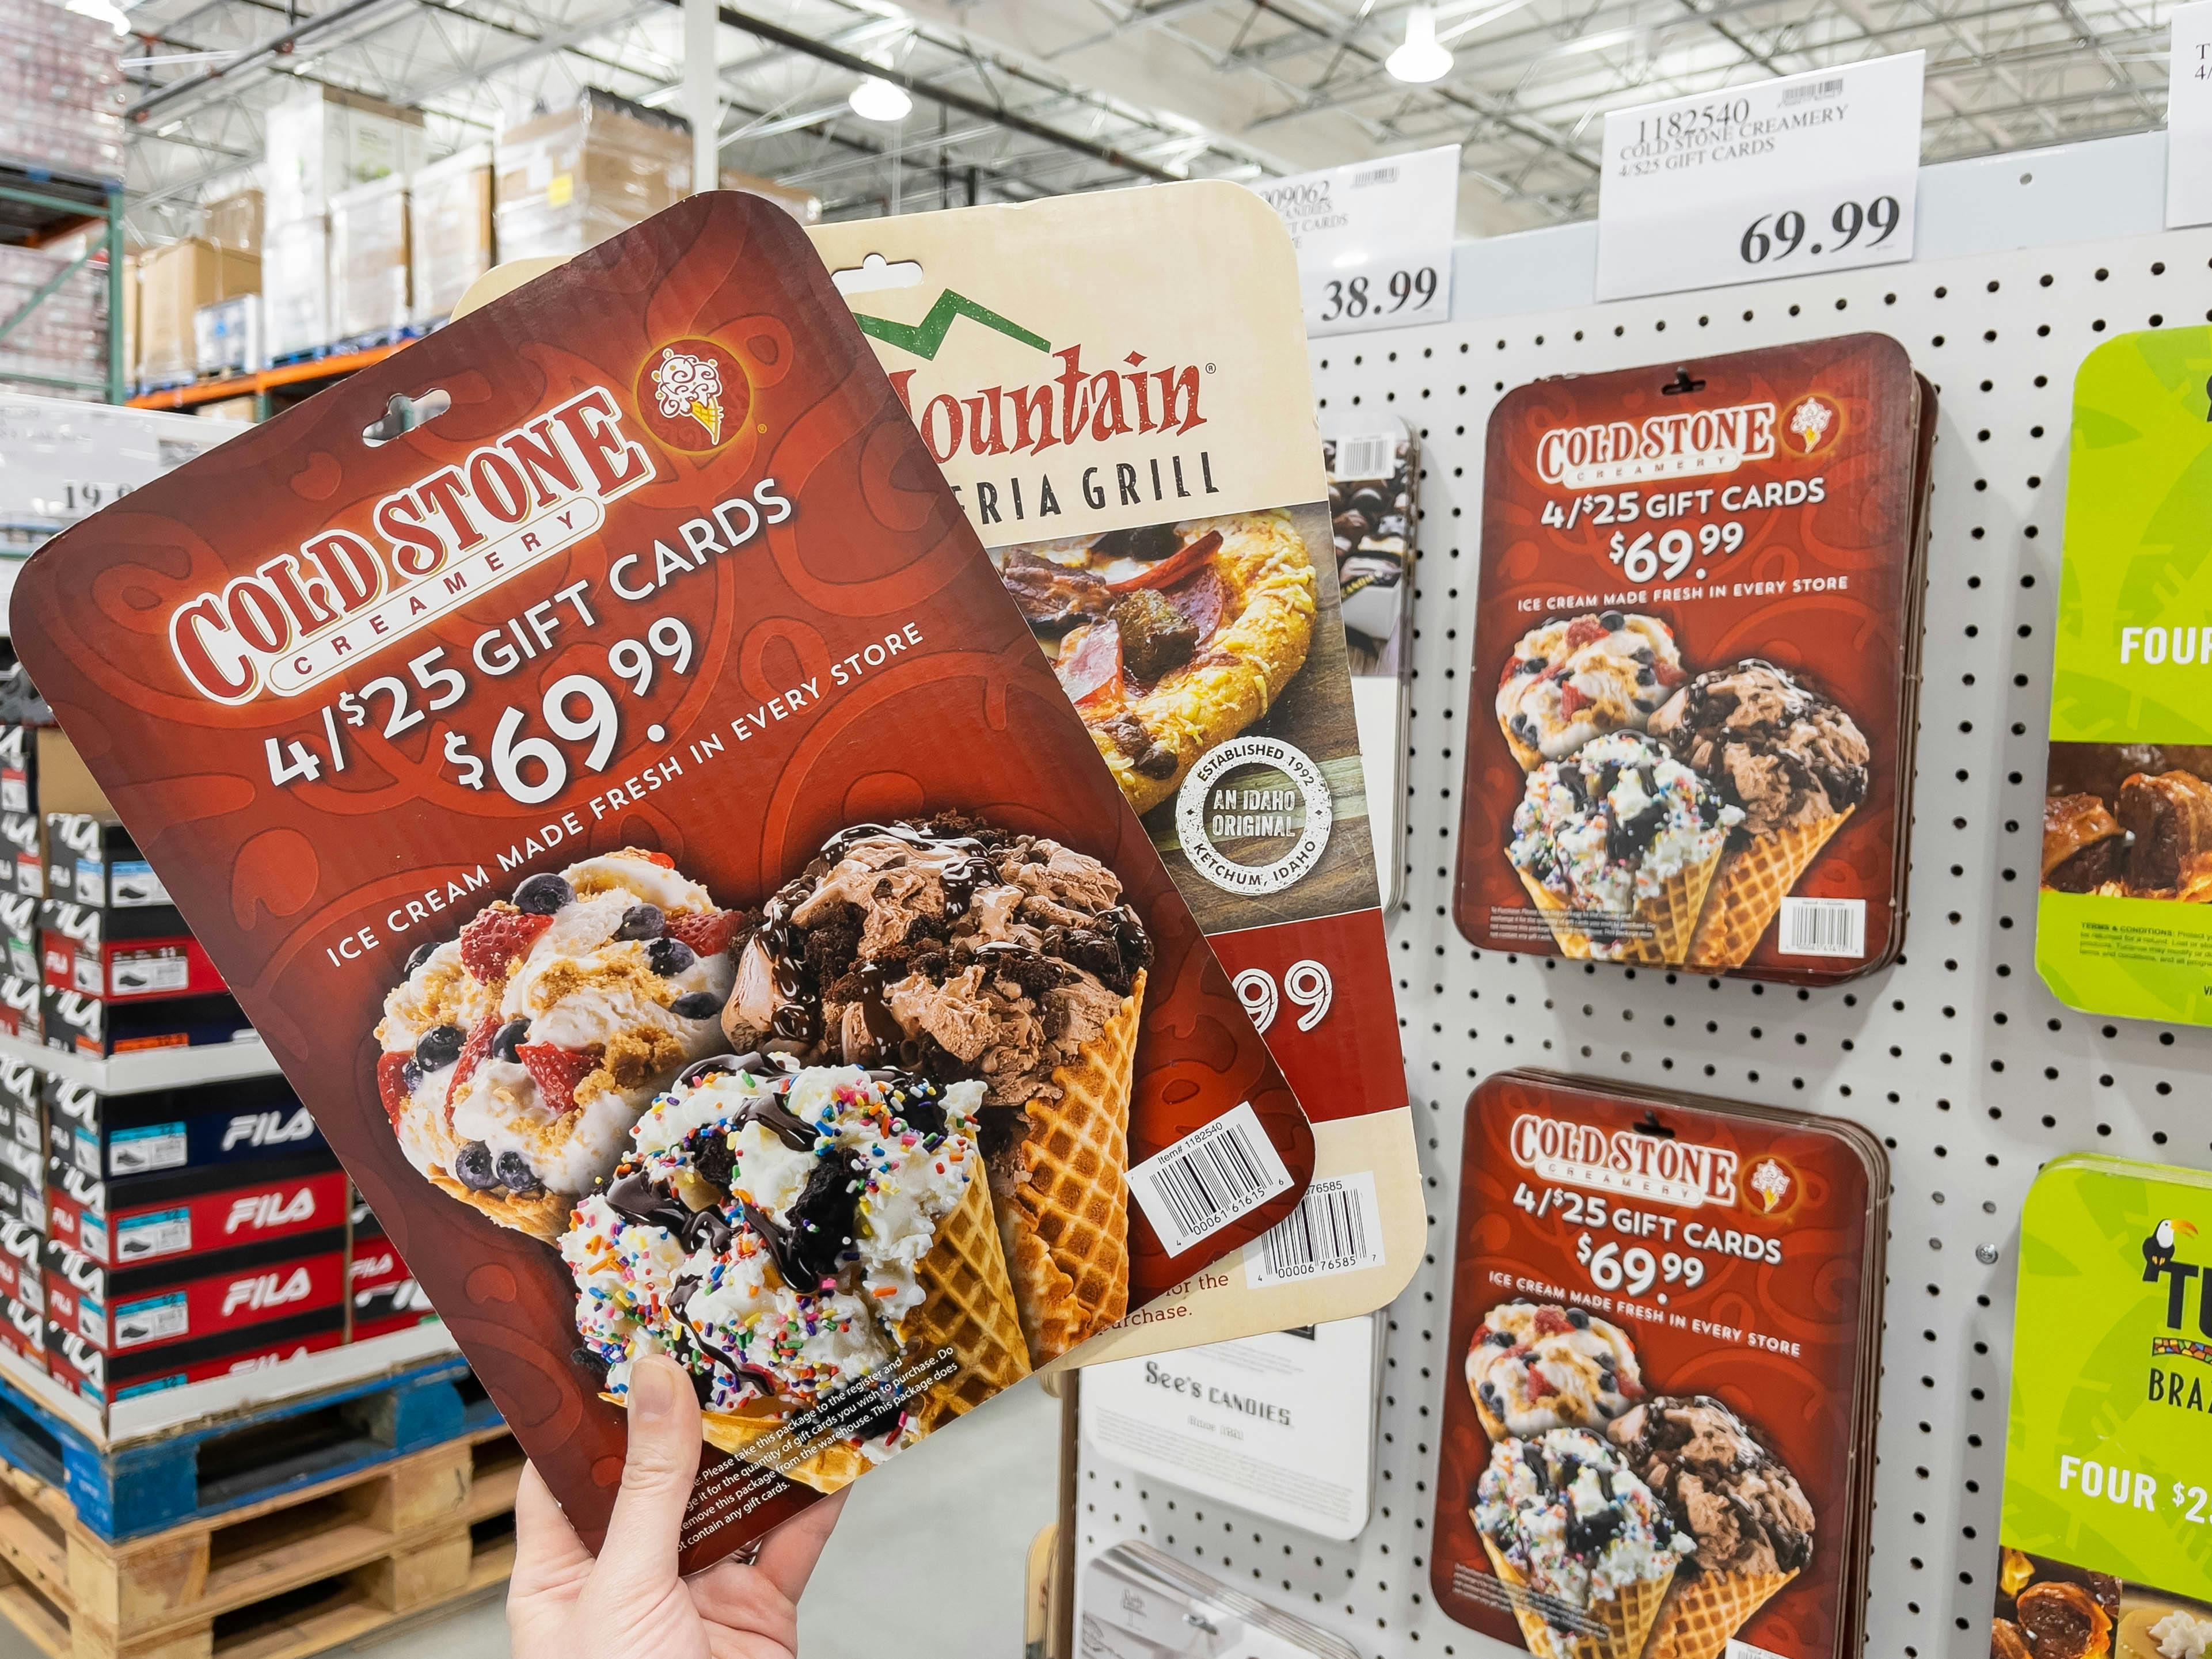 A person holding up two cardboard display cutouts for gift cards sold at Costco. One of the cards is for 4, $25 Cold Stone Creamery gift cards for $69.99